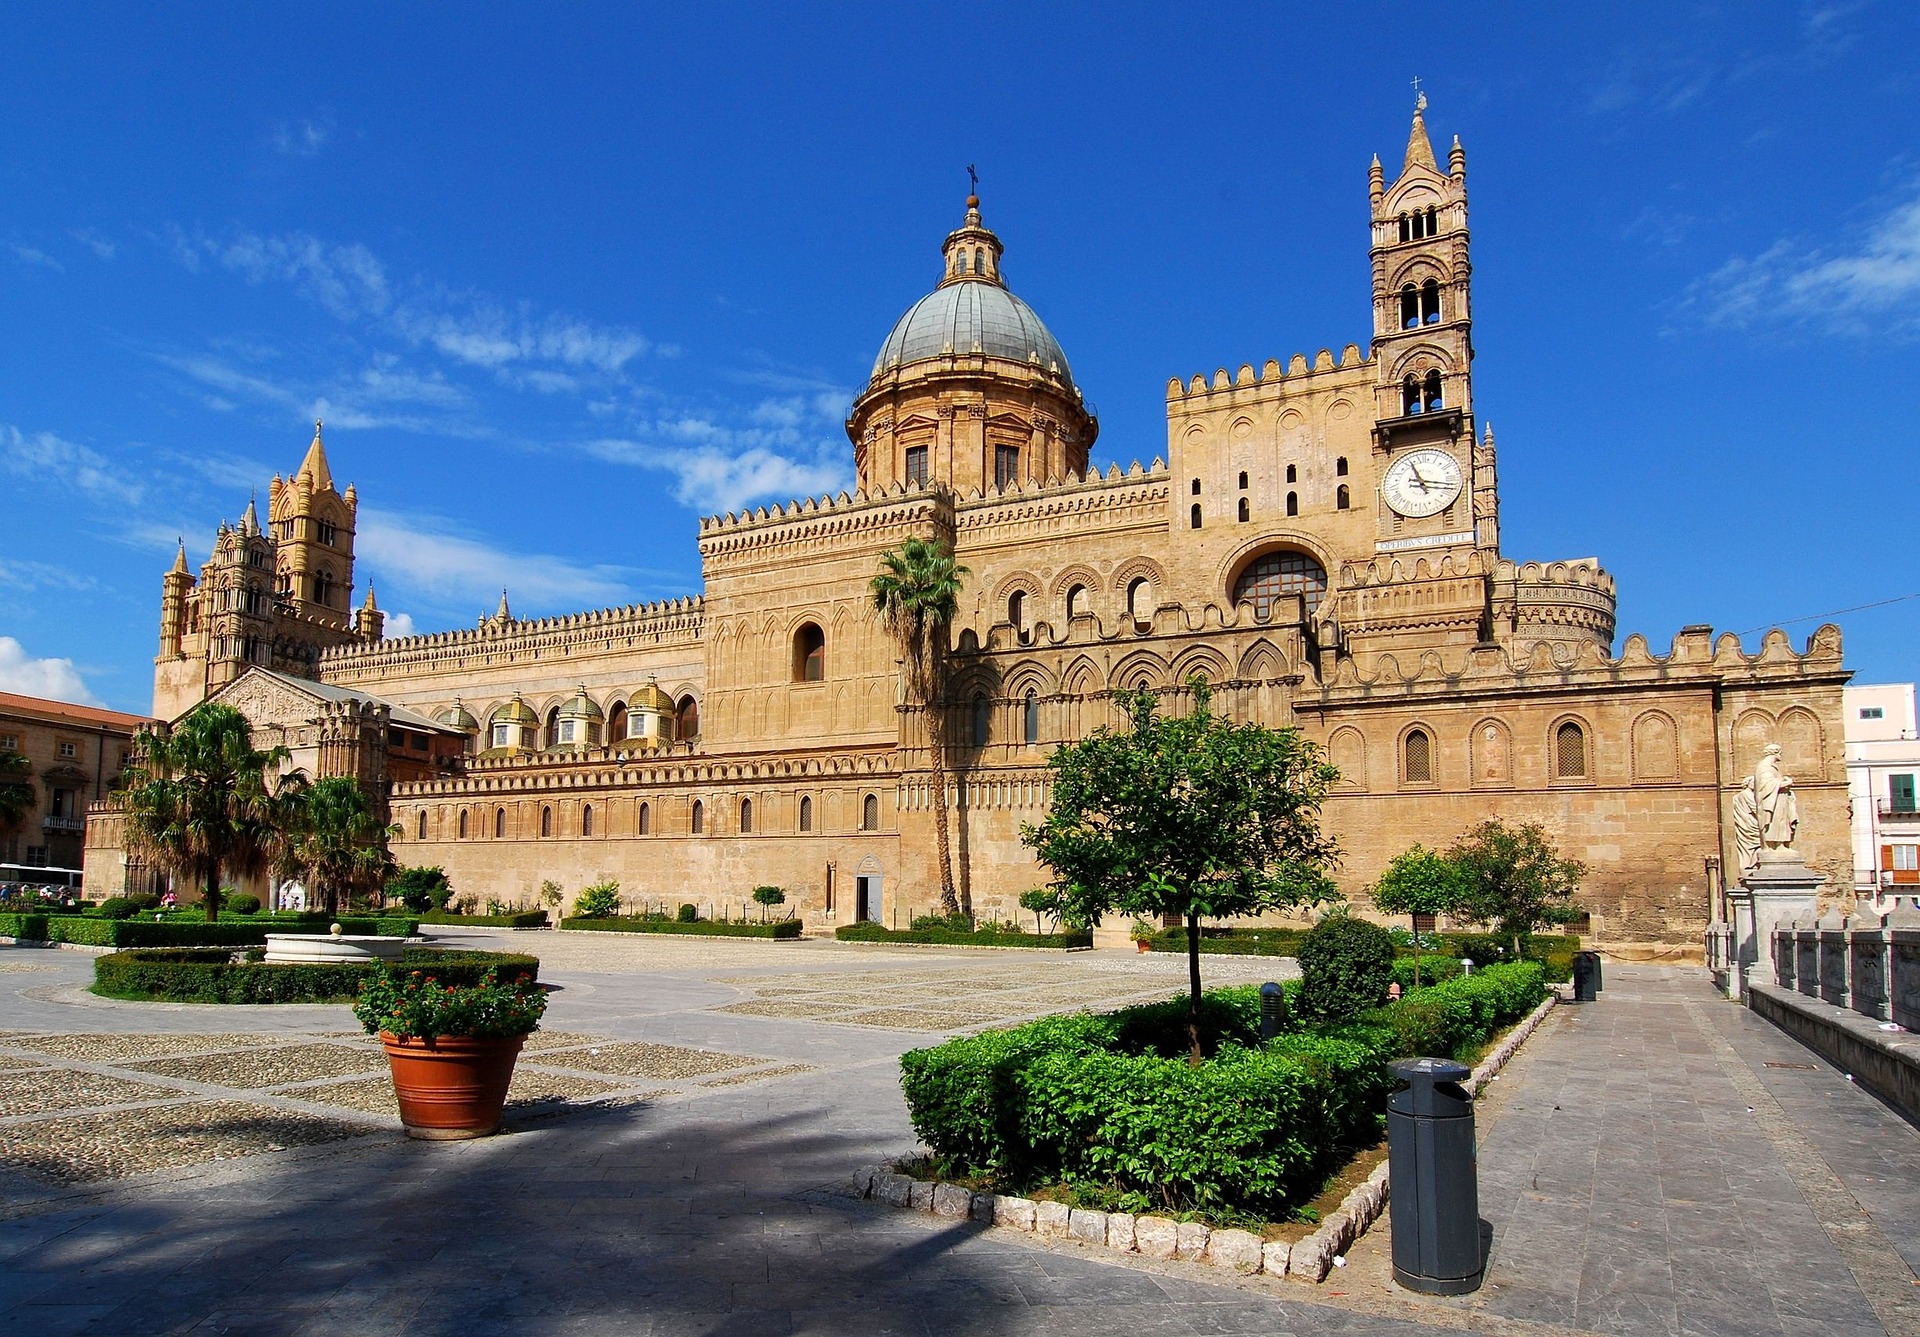 City to City Hop: 8 Exciting Things to See on a Transfer Tour of Sicily